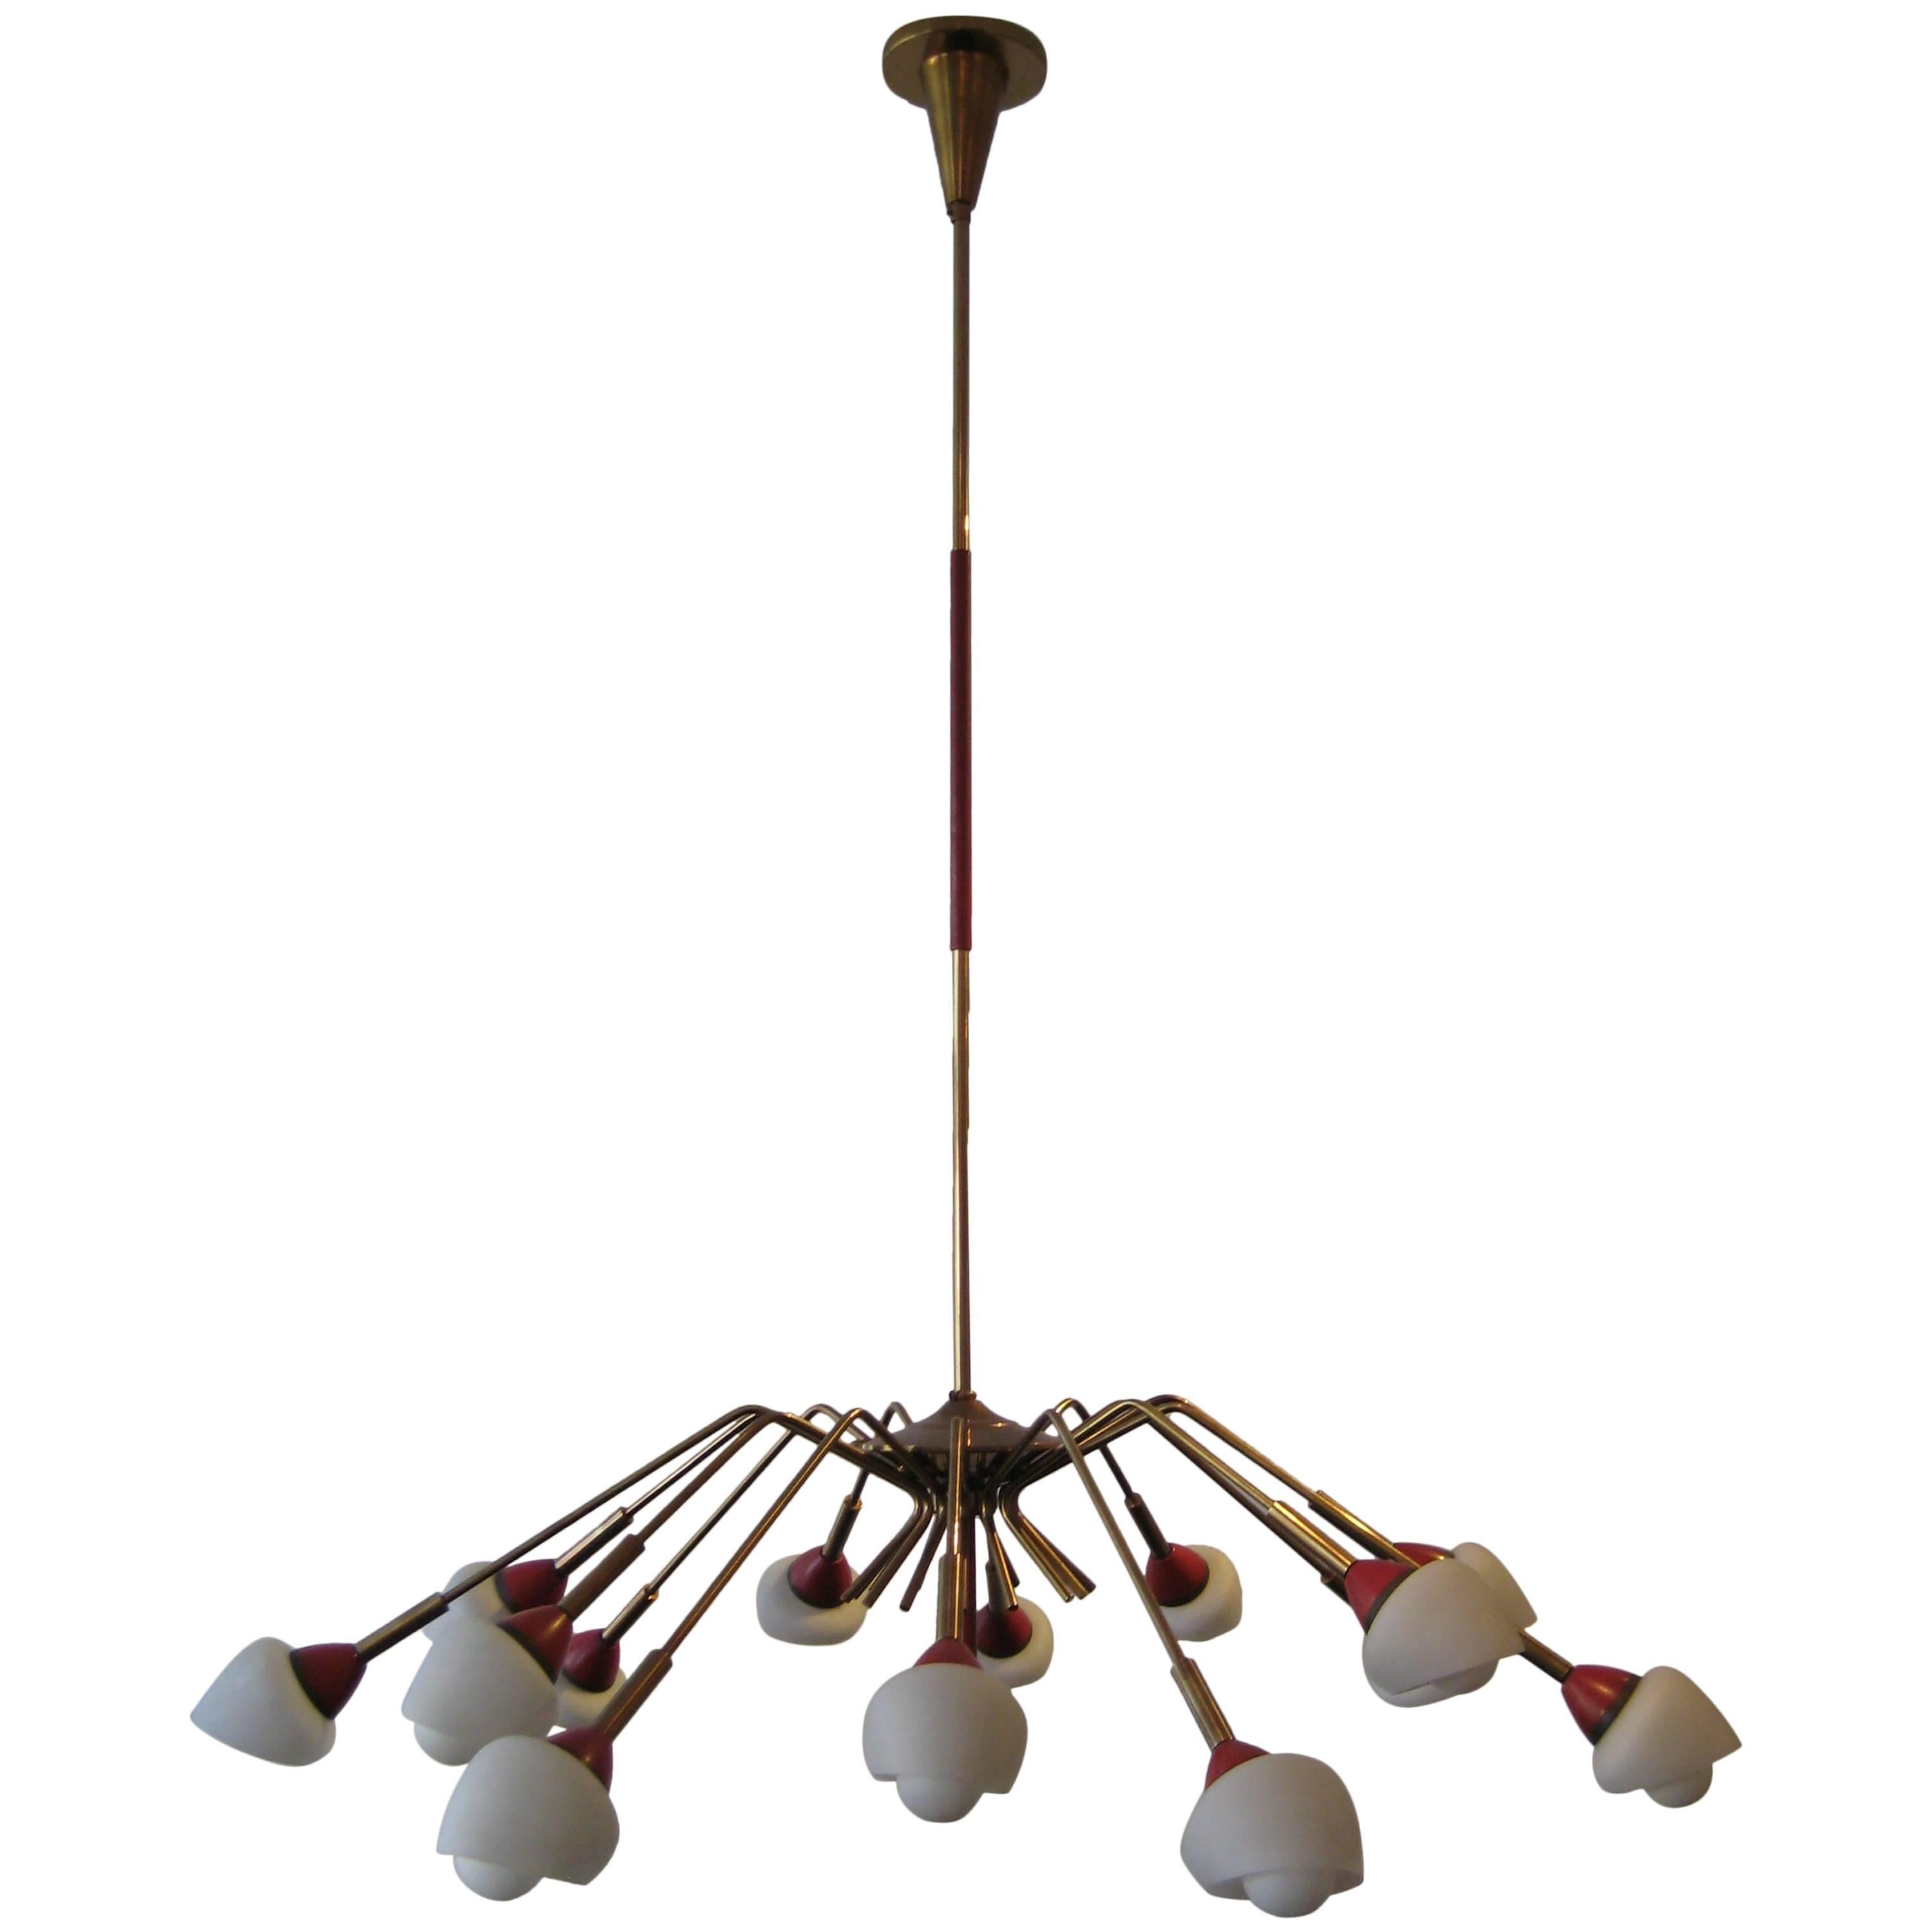 Exemplary, 1950s, Italian, Metal and Glass Chandelier For Sale